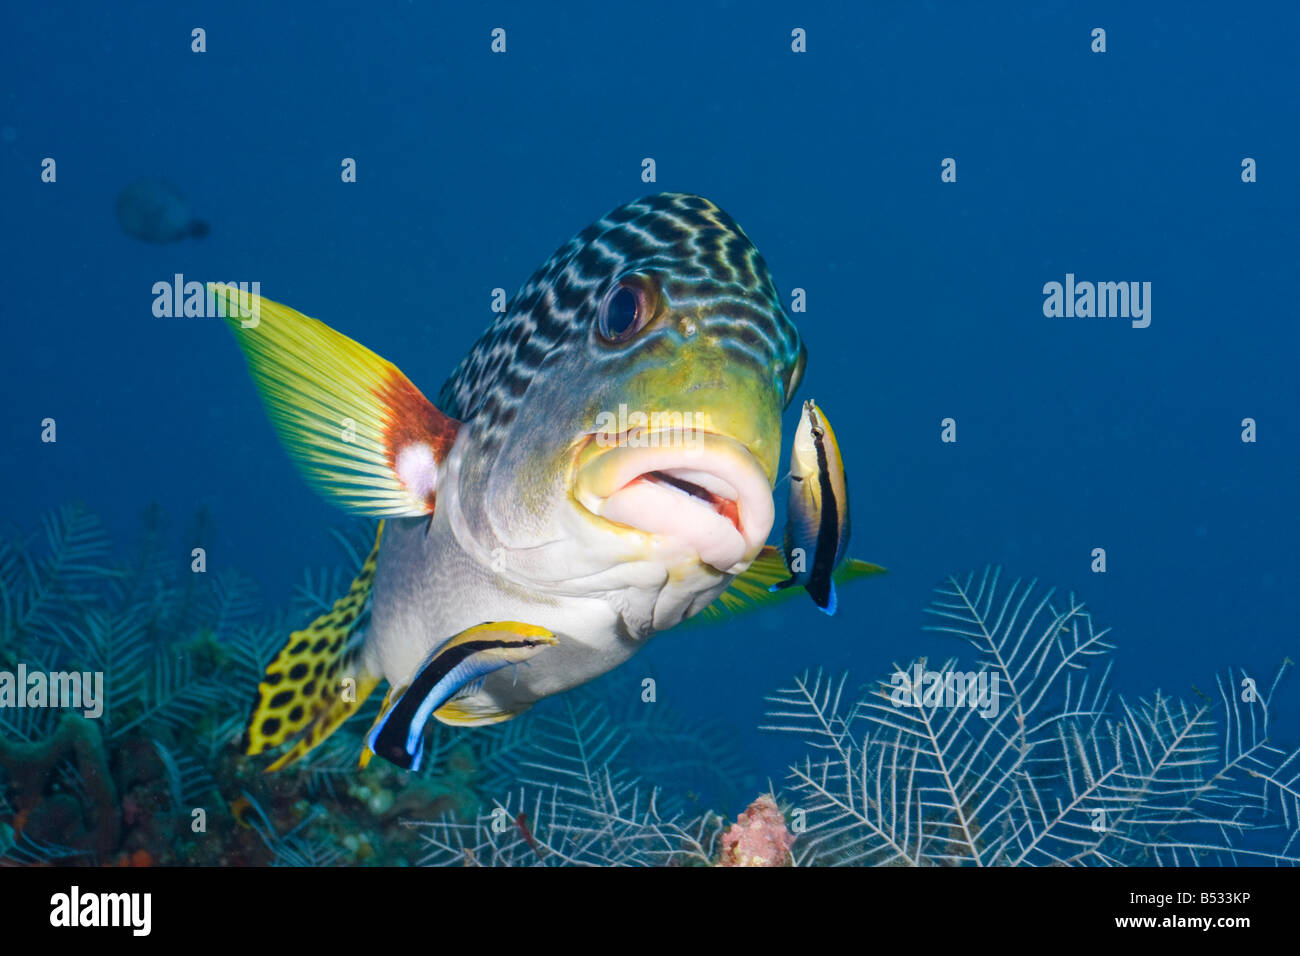 A lined sweetlips with two cleaner wrasse giving it a look over for parasites, Komodo, Indonesia. Stock Photo